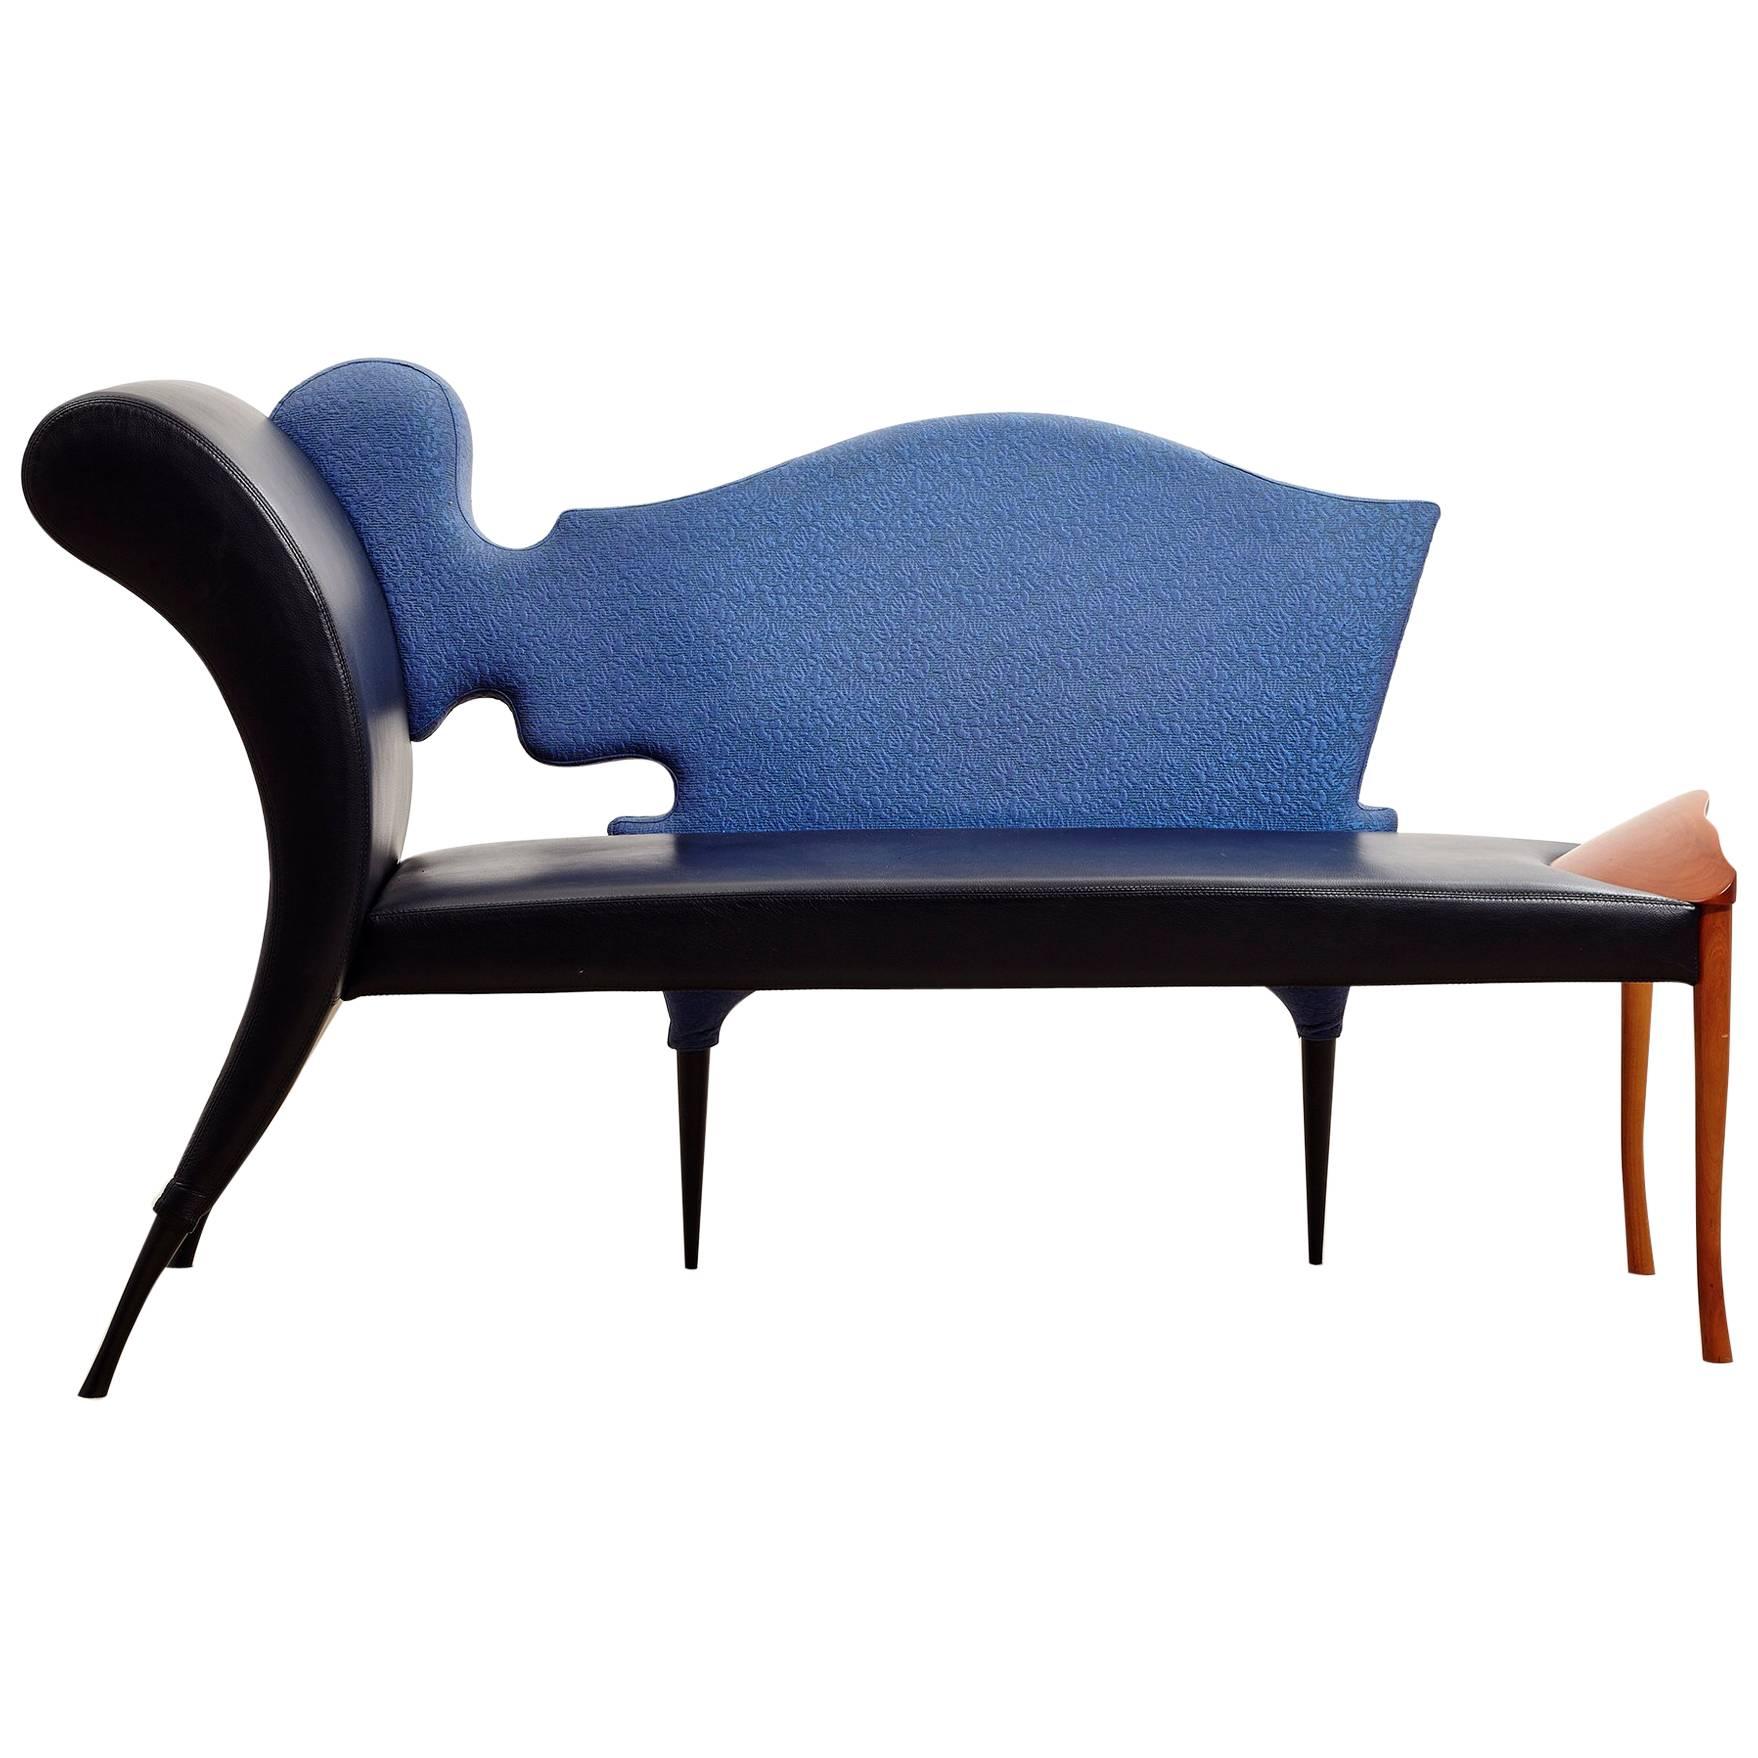 Chaise Longue Designed by Borek Sipek for Driade in 1990, Now Out of Production